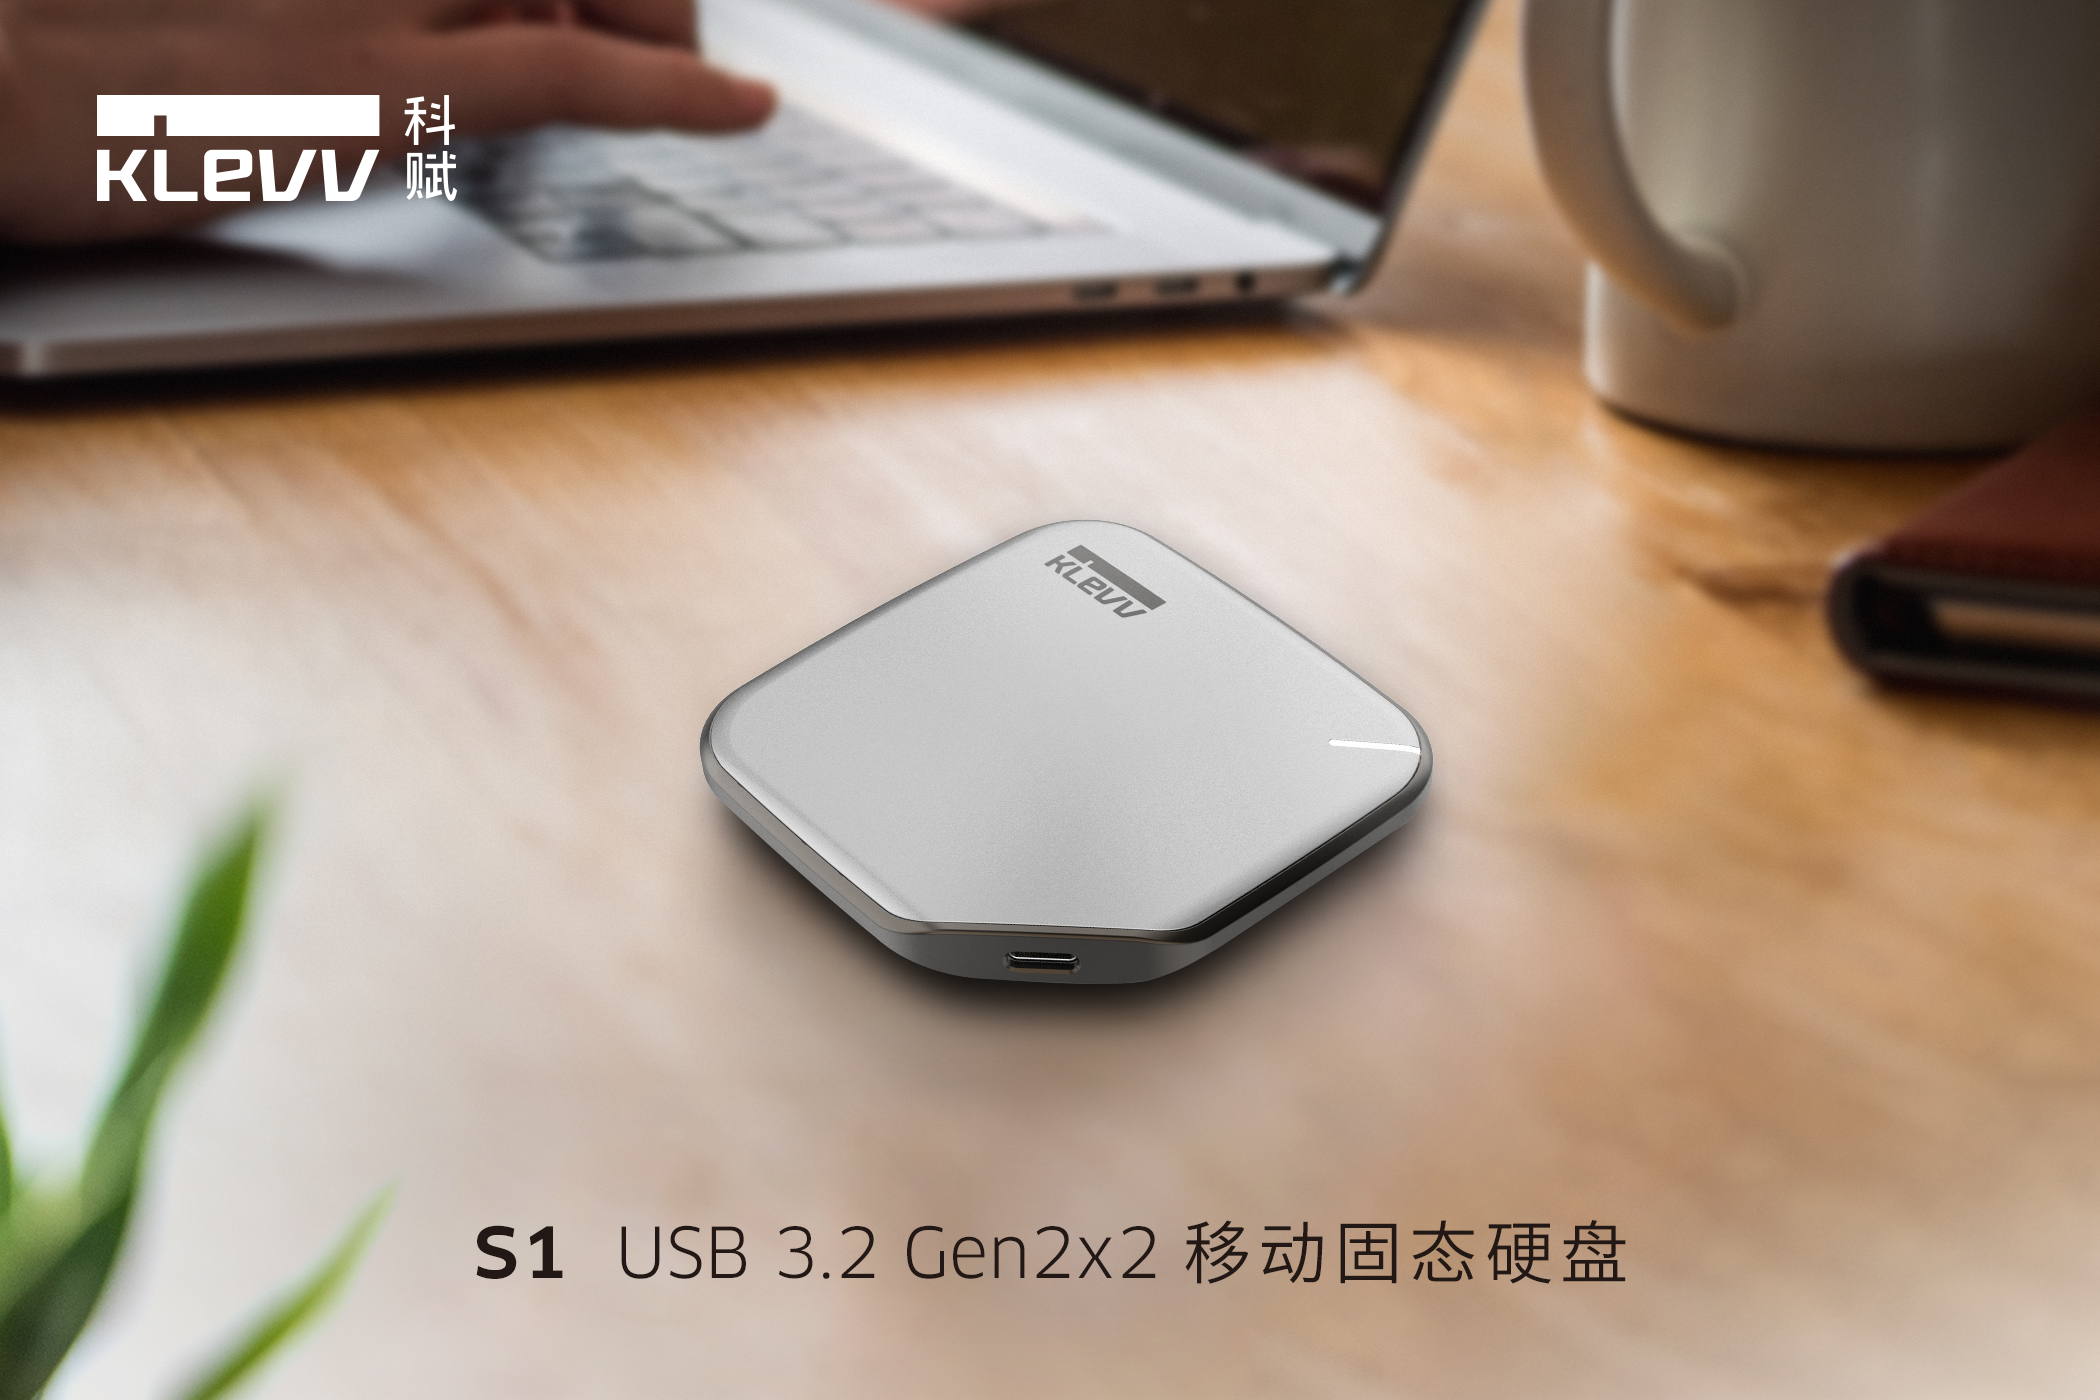 KLEVV launched S1 Portable SSD